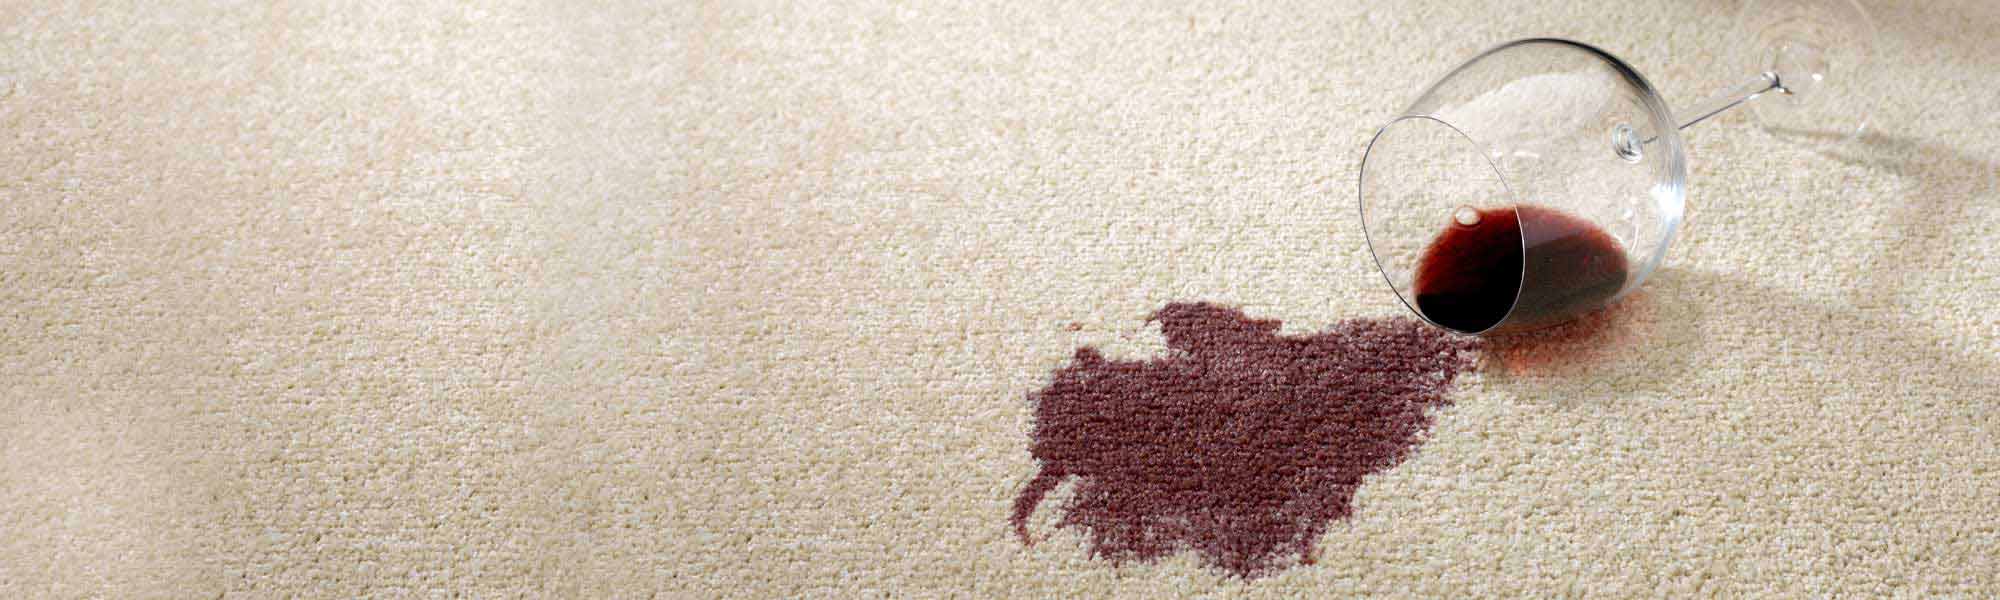 Professional Stain Removal Service by Ivy Green Chem-Dry in Corona CA